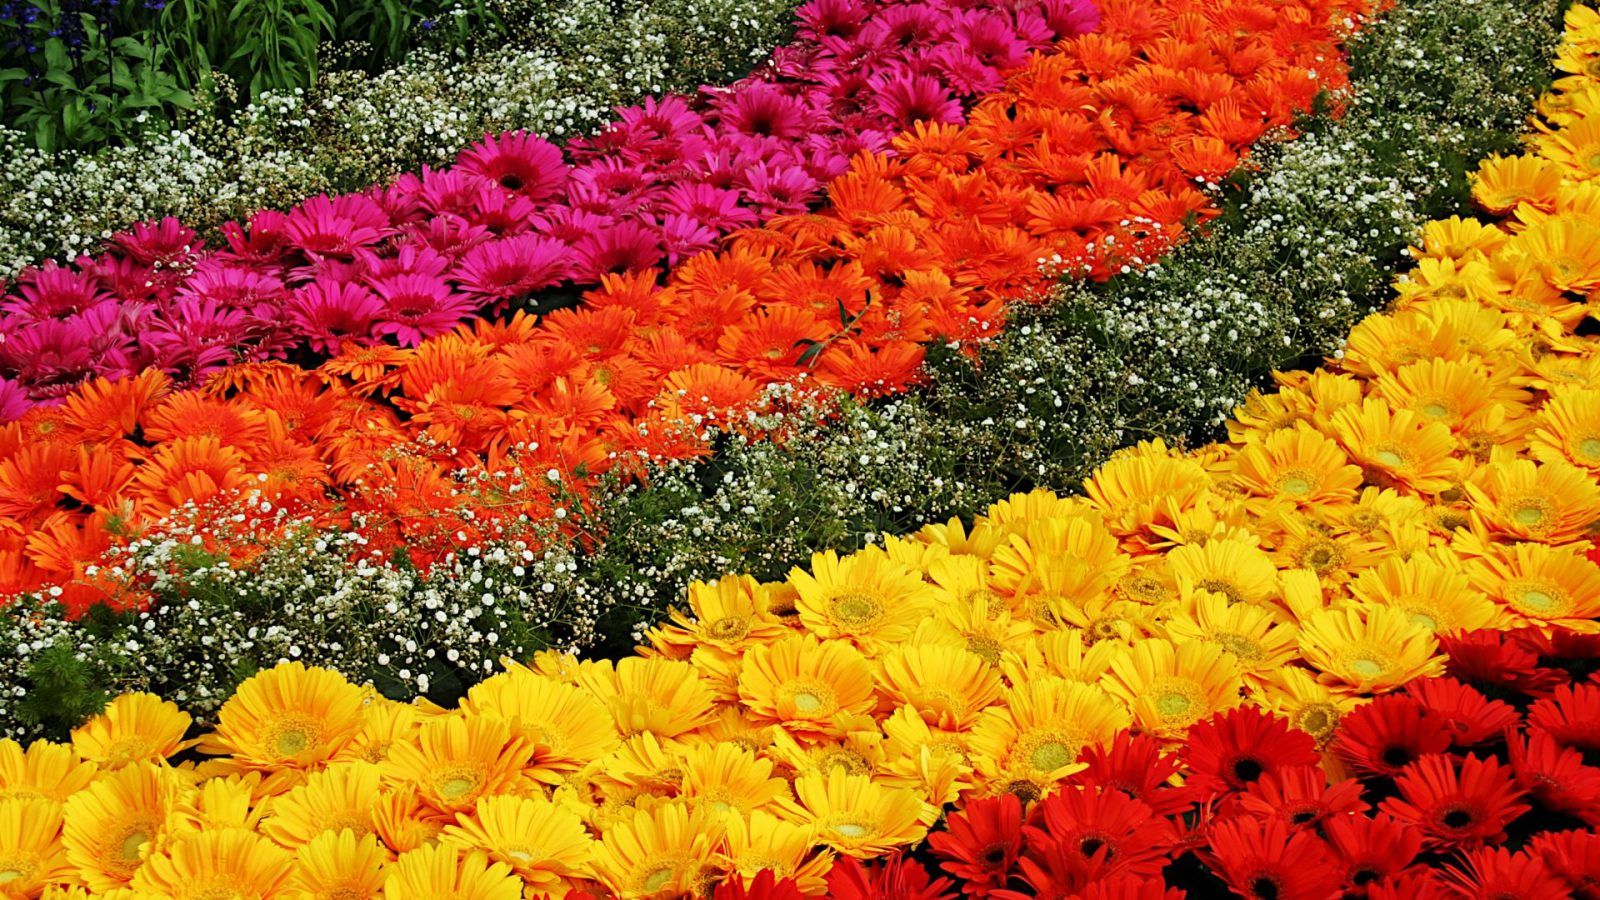 Bengaluru brings back its Lalbagh flower show for Republic Day 2023